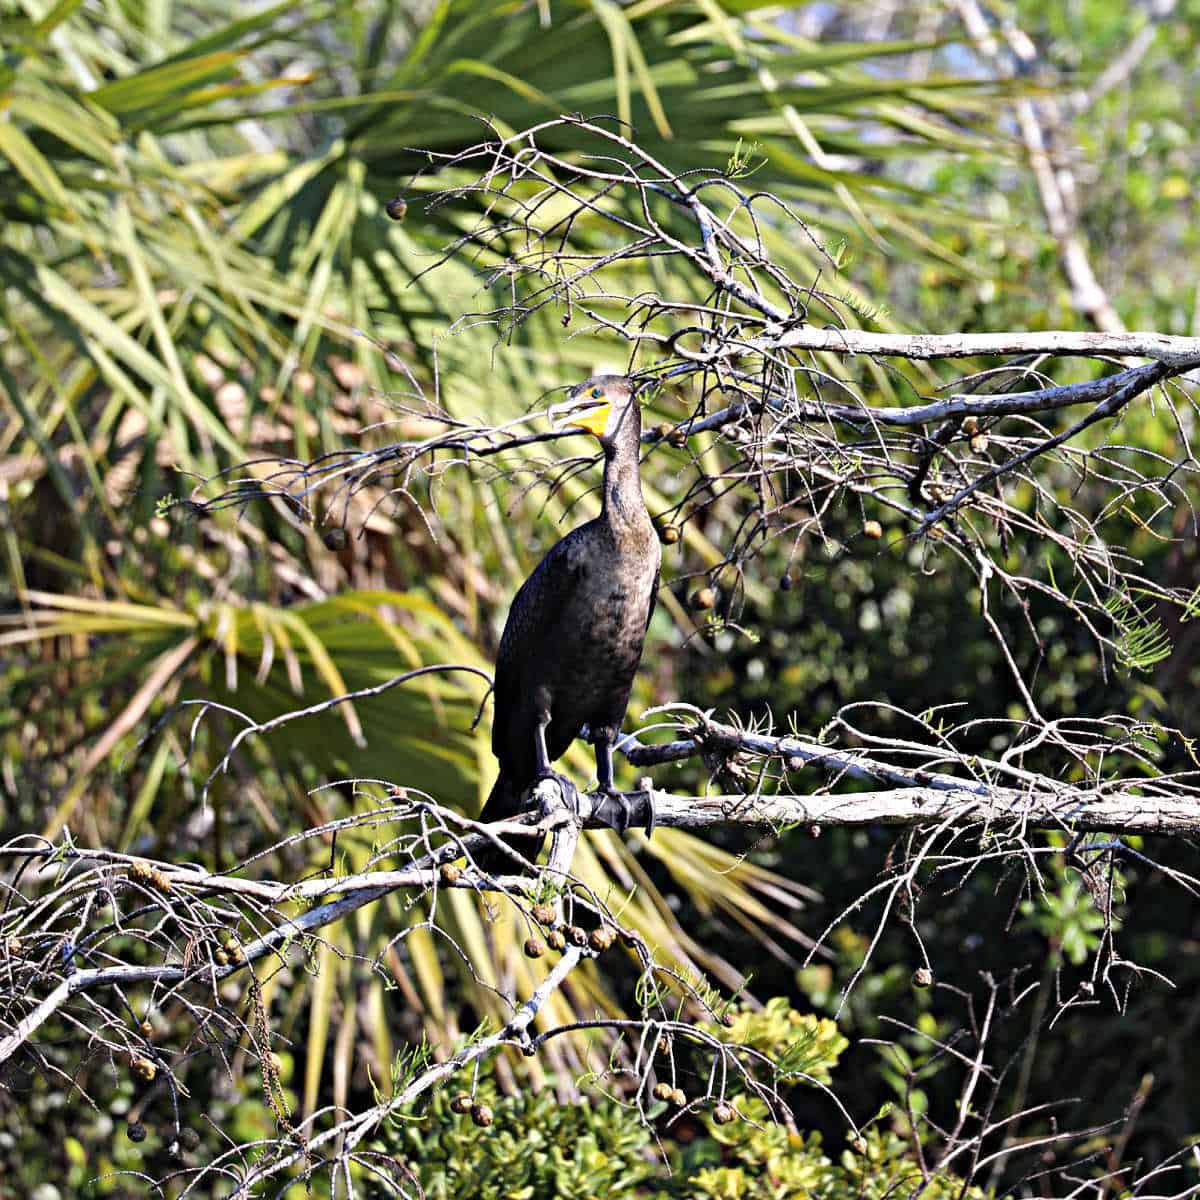 Double Crester Cormorant in Big Cypress National Preserve